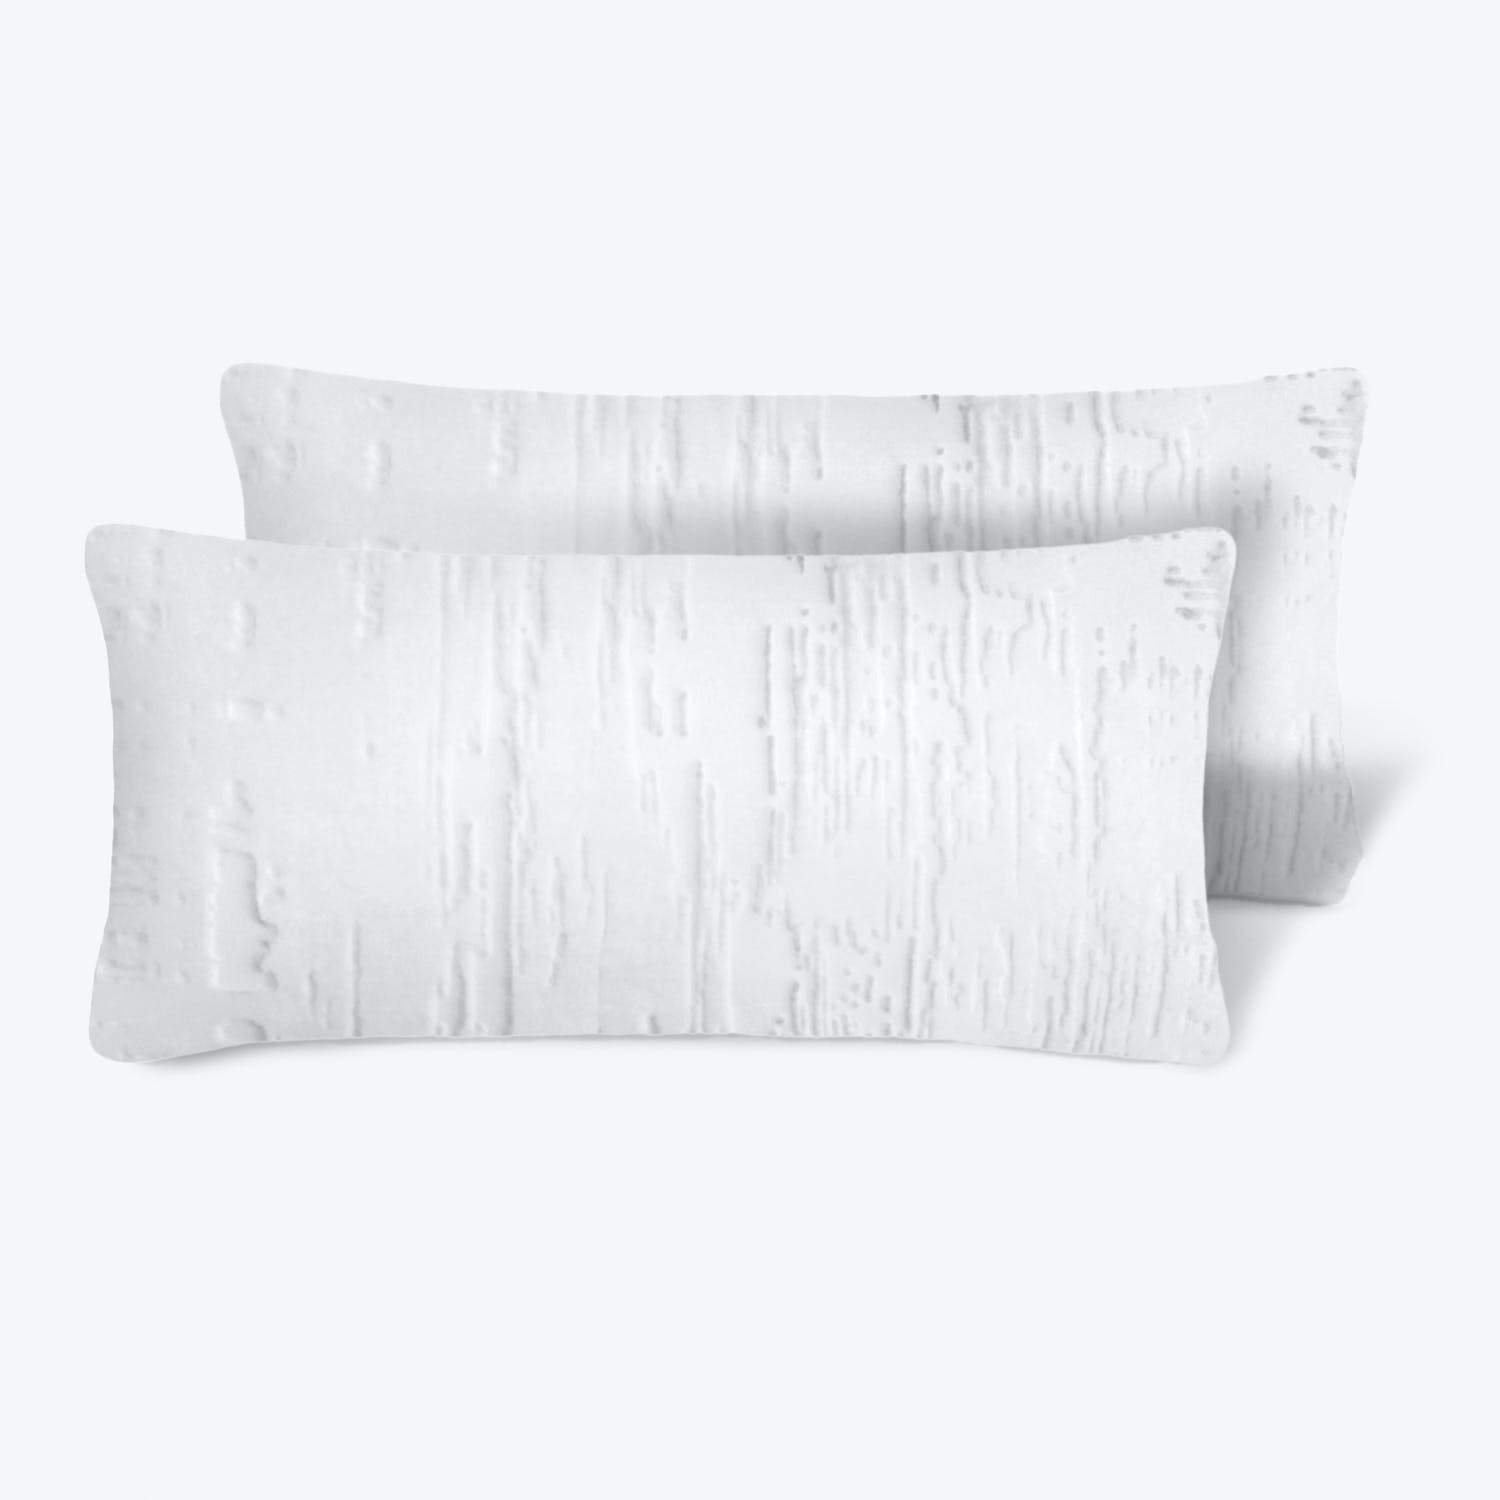 Minimalistic rectangular pillows with textured brush stroke pattern in white.